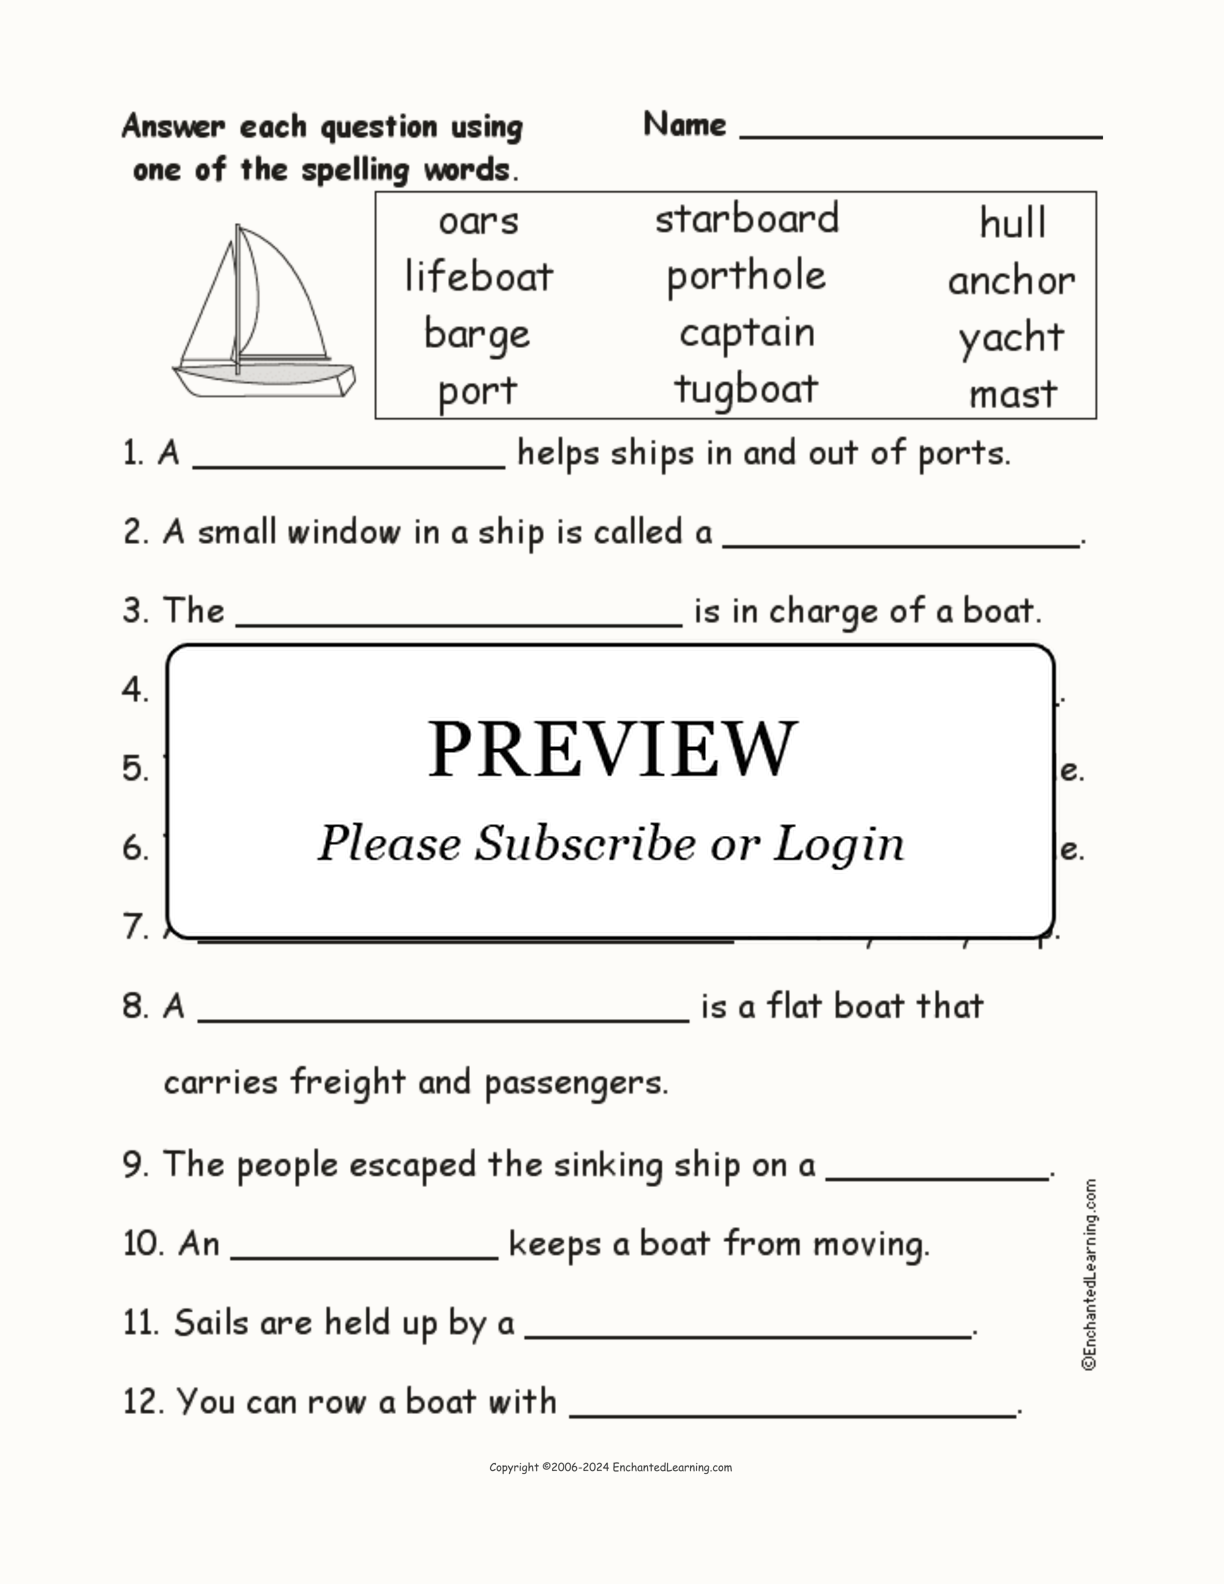 Boat Spelling Word Questions interactive worksheet page 1